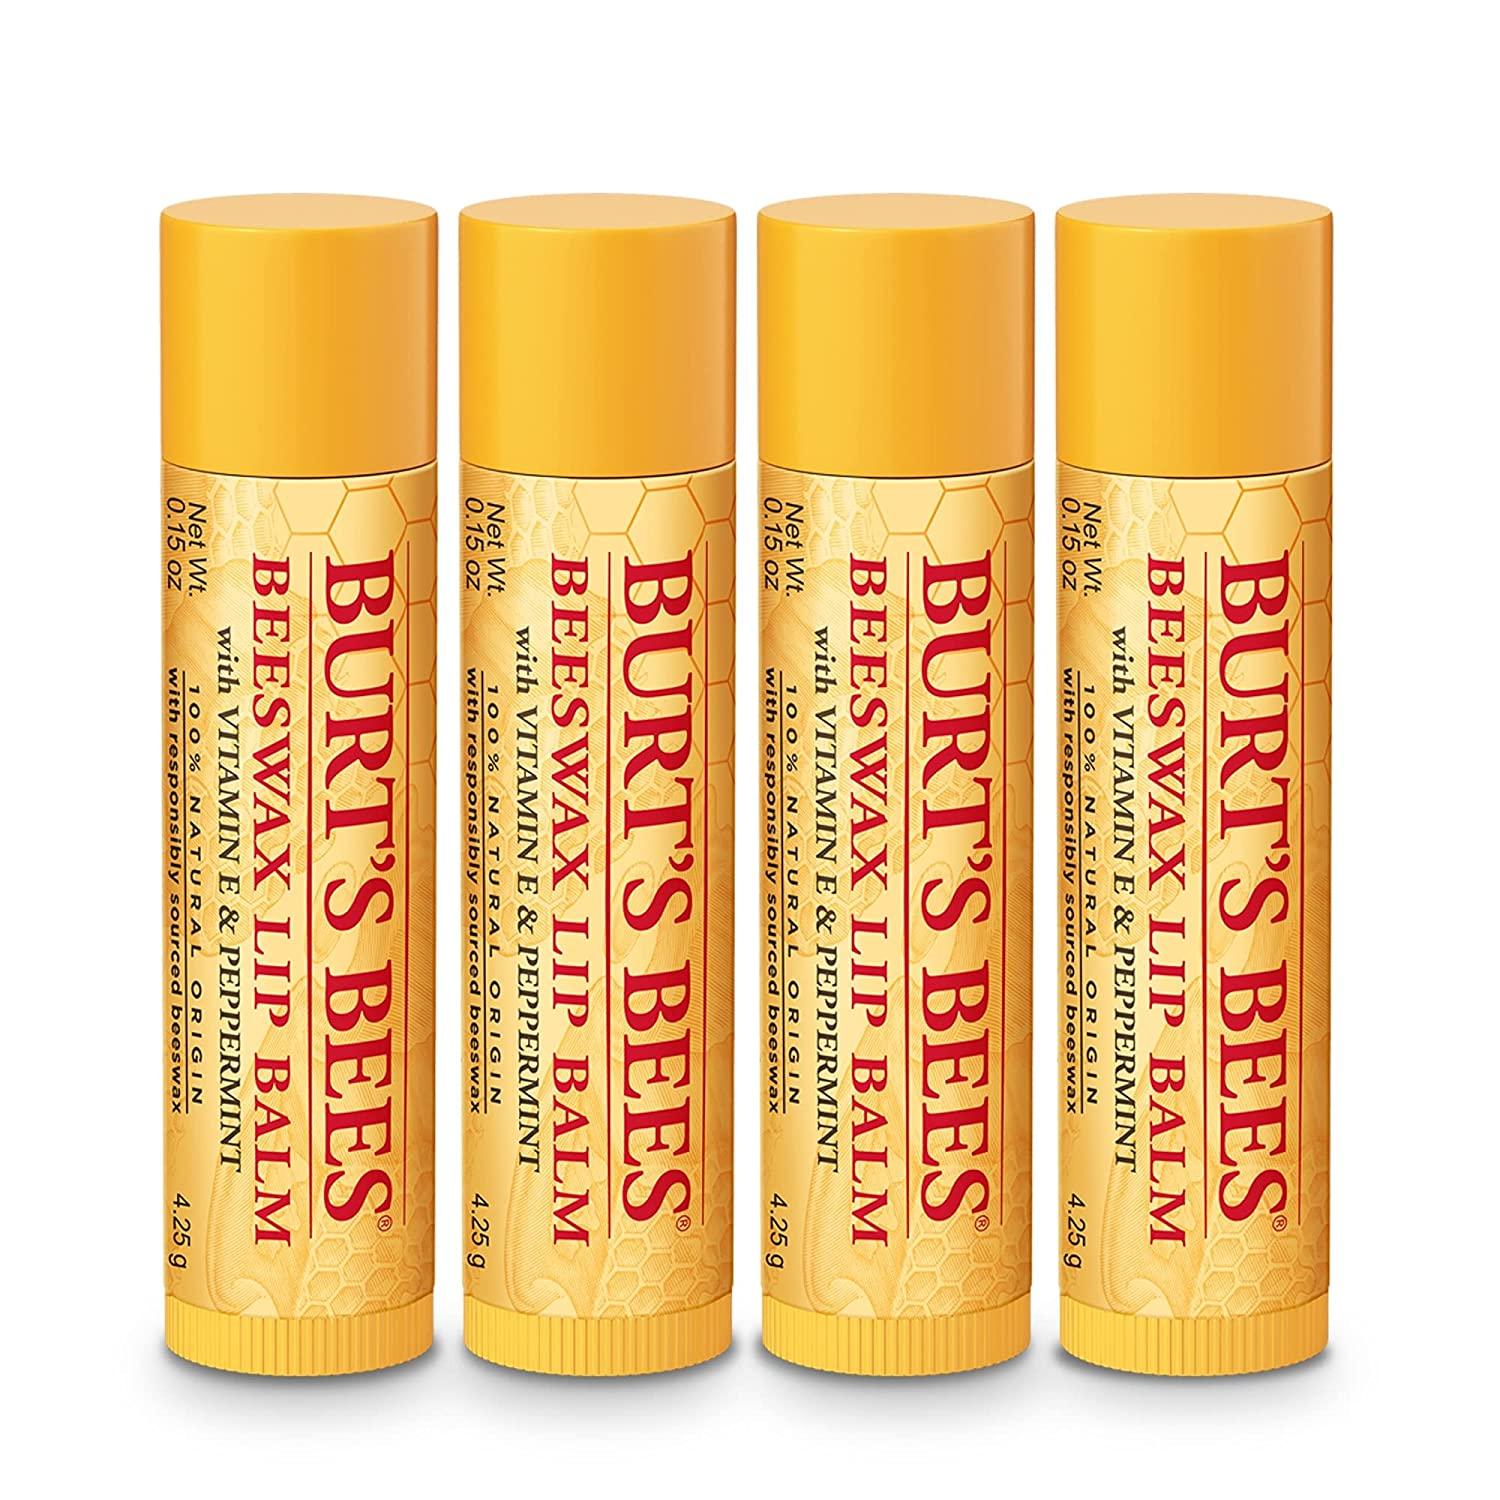 Burt's Bees Holiday Gift, 4 Lip Balm Stocking Stuffer Products, Beeswax  Bounty Classic Set - Original Beeswax (New Version) Beeswax Classic Gift Set